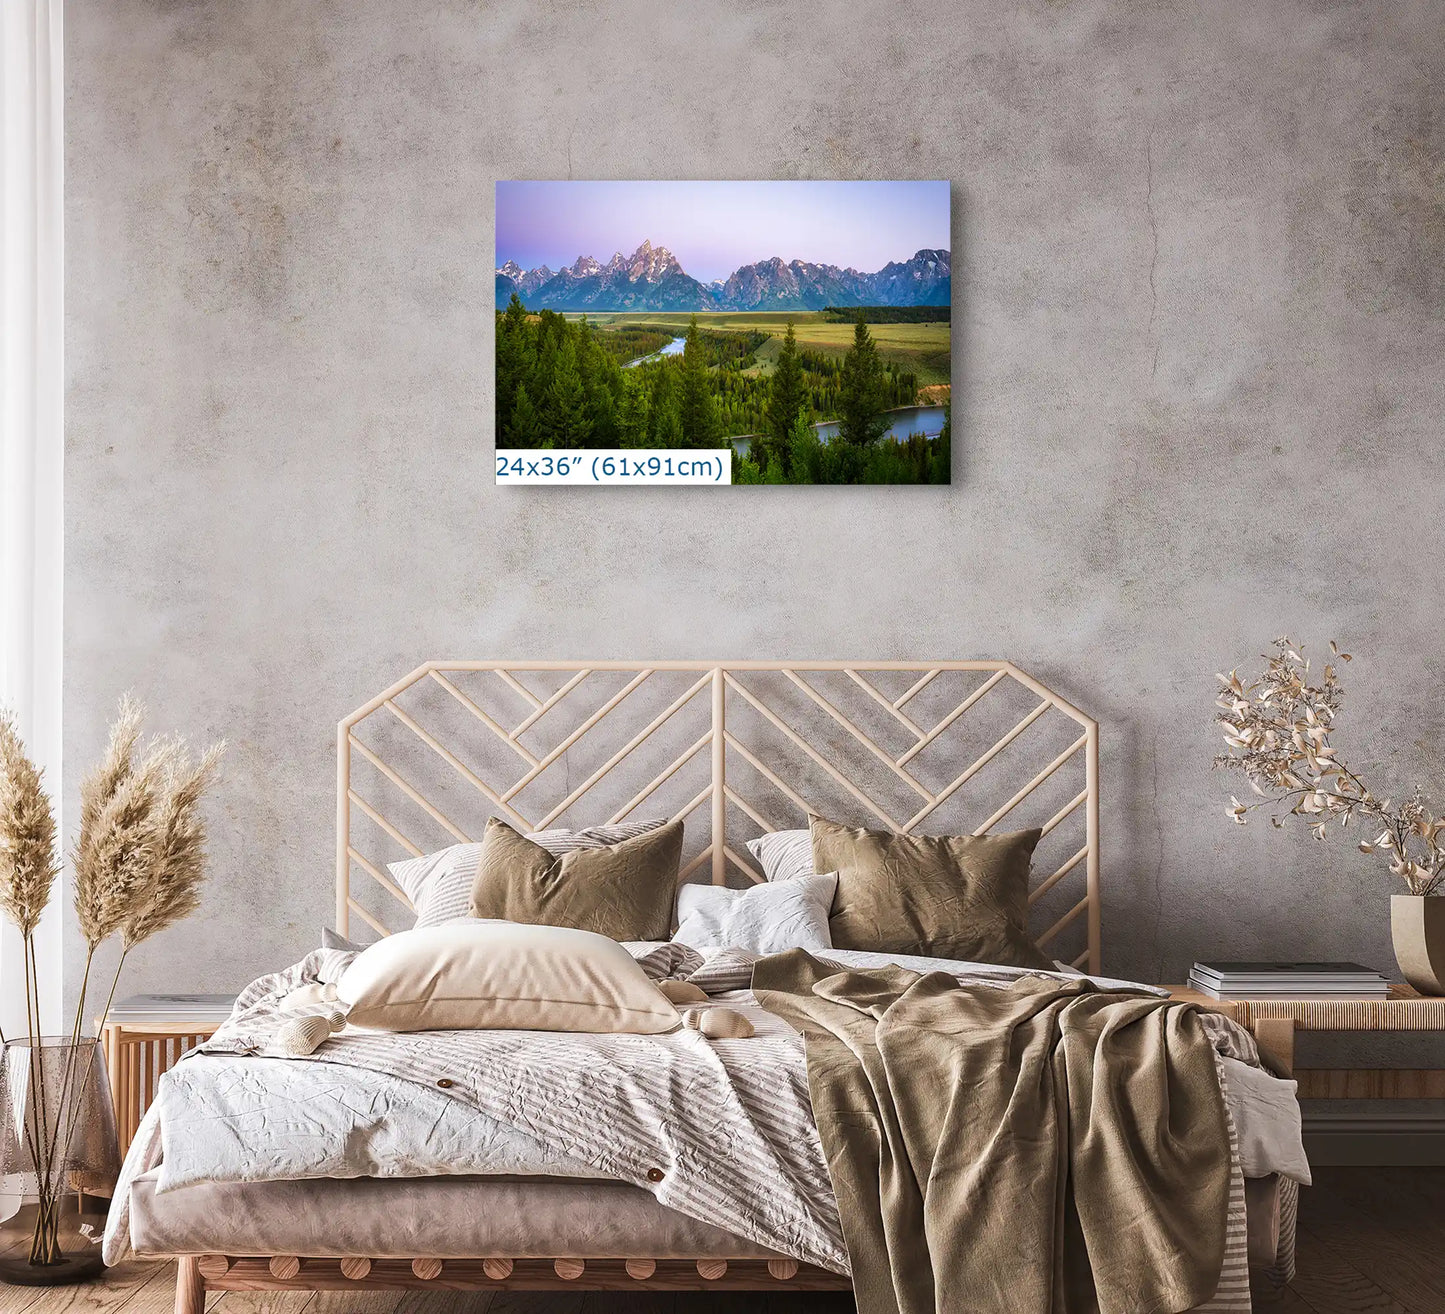 A 24x36 inch canvas print of Grand Teton Mountains during a purple sunrise on a bedroom wall above a bed with neutral bedding.